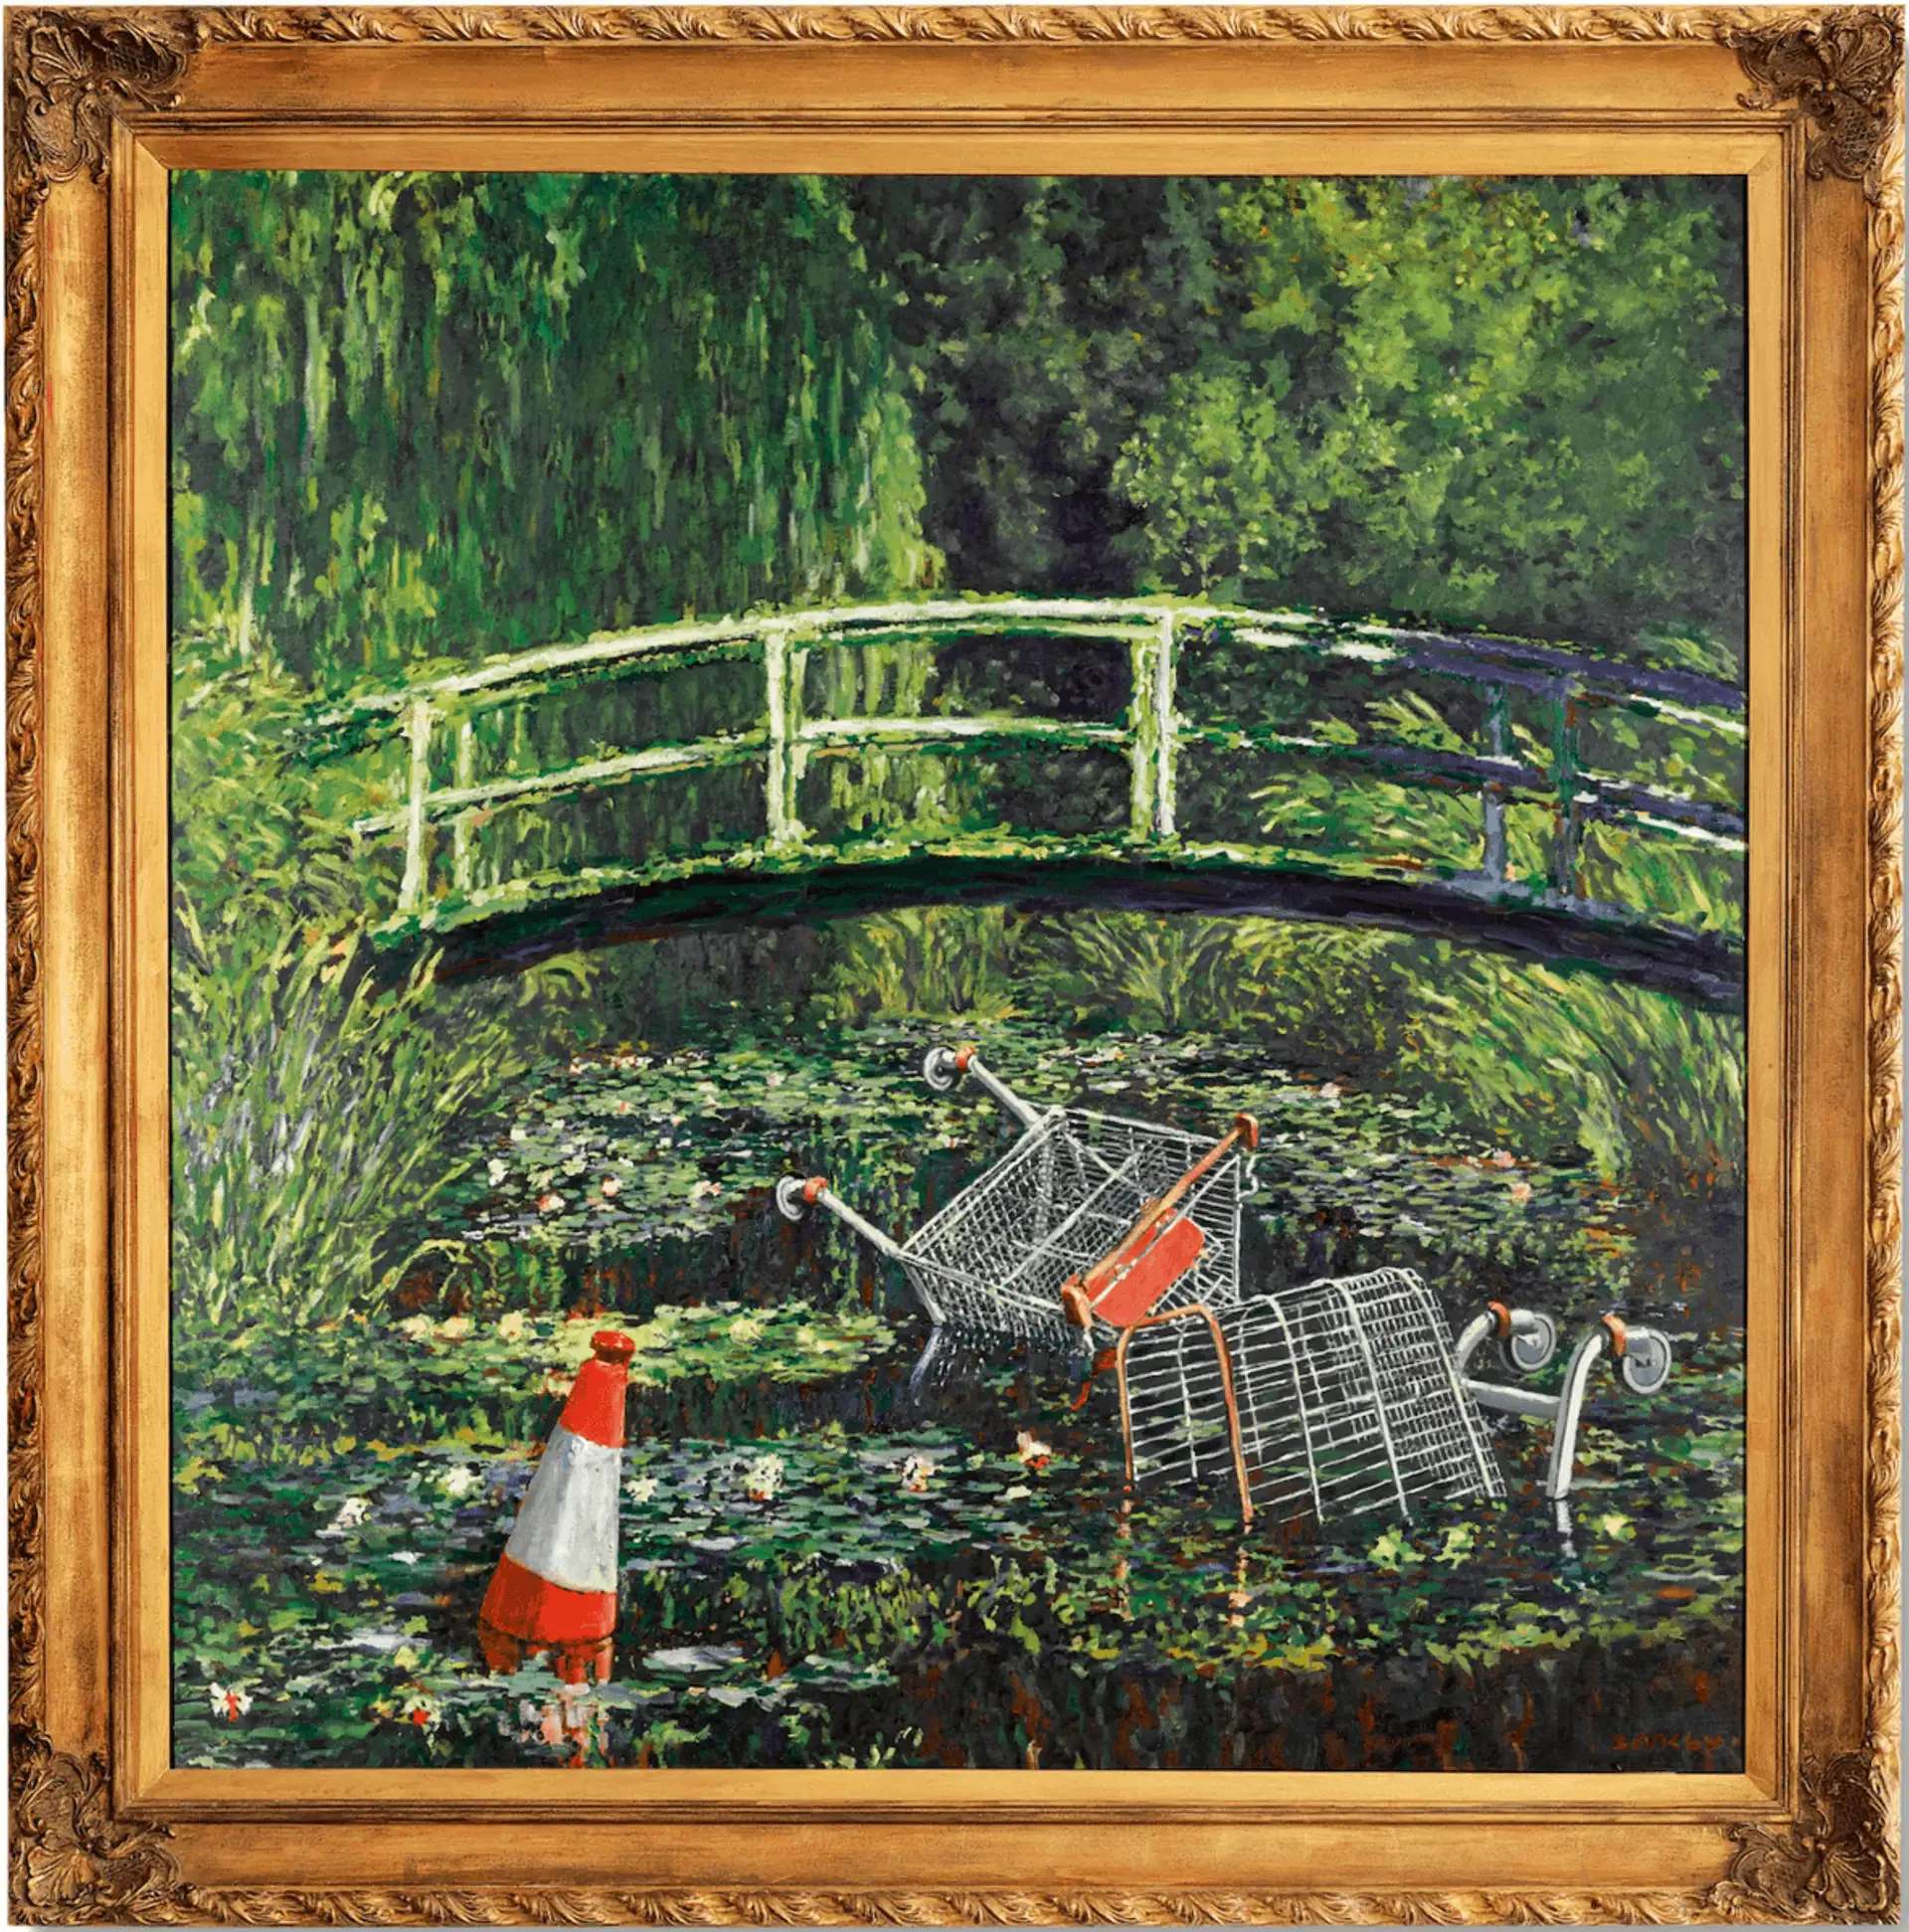 An appropriation of Claude Monet's Bridge Over A Pond Of Water Lilies by Banksy. Two abandoned shopping trolleys and a traffic cone float in the water of Monet's original painting.